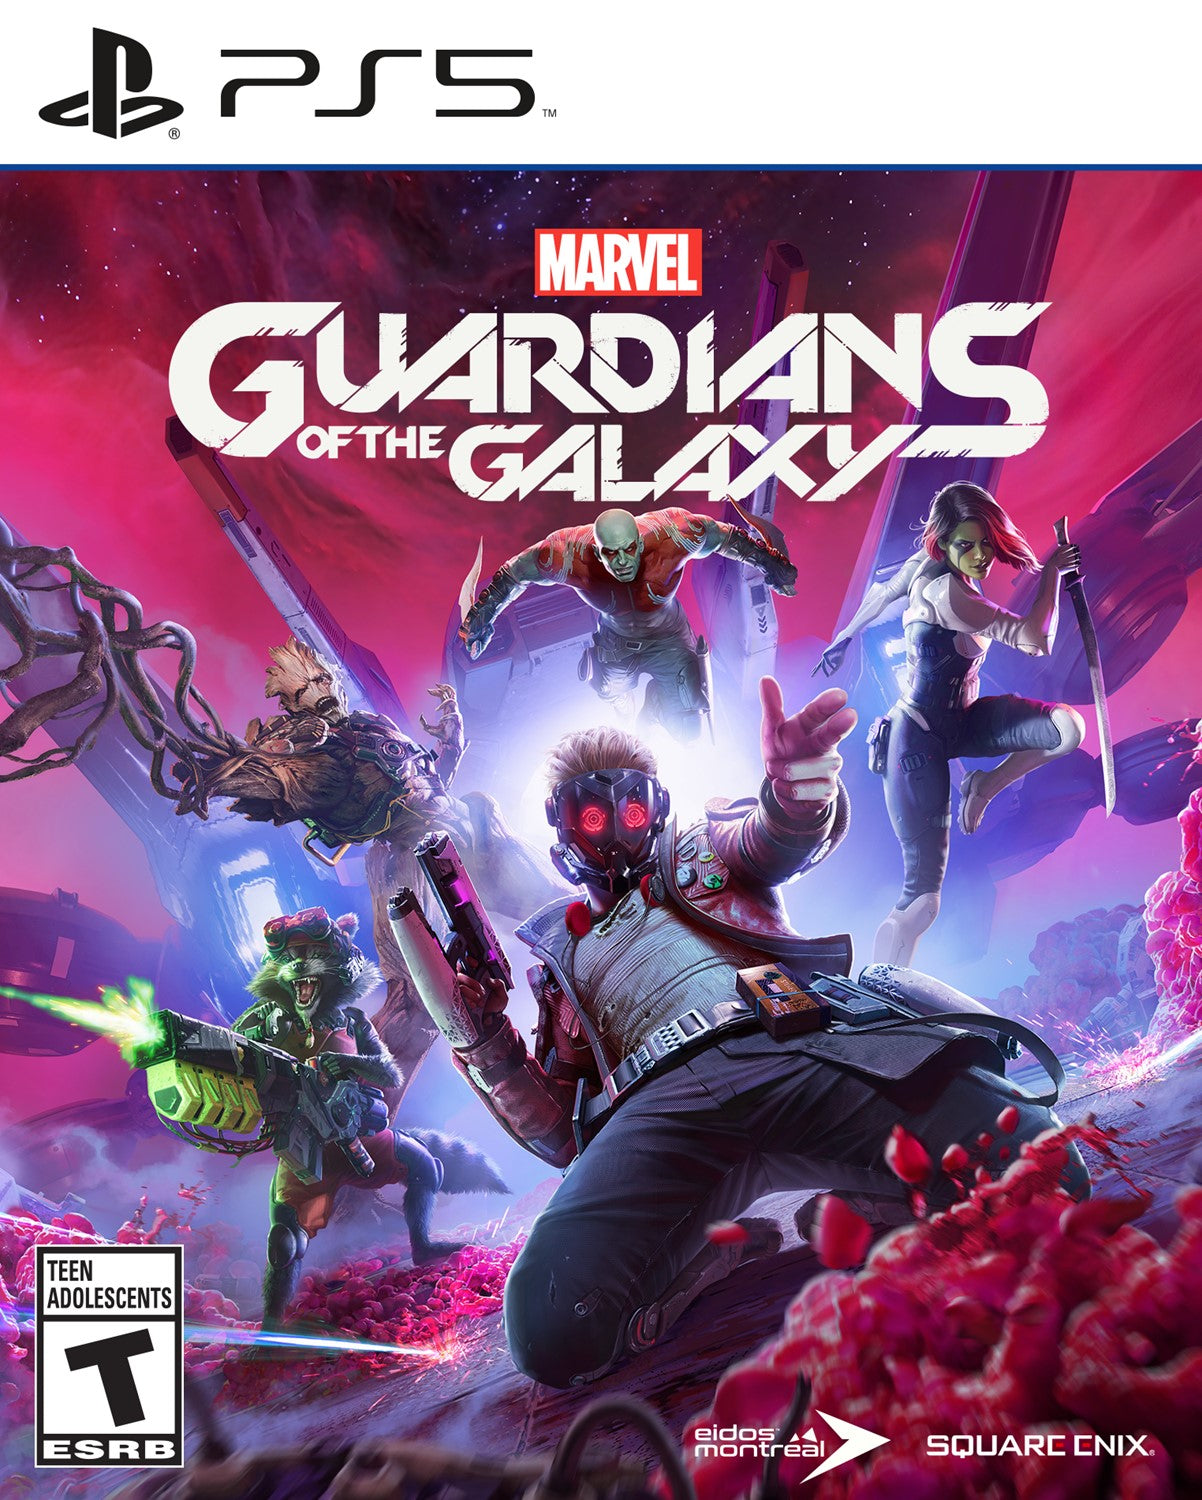 Playstation 5 - Marvel: Guardians of the Galaxy